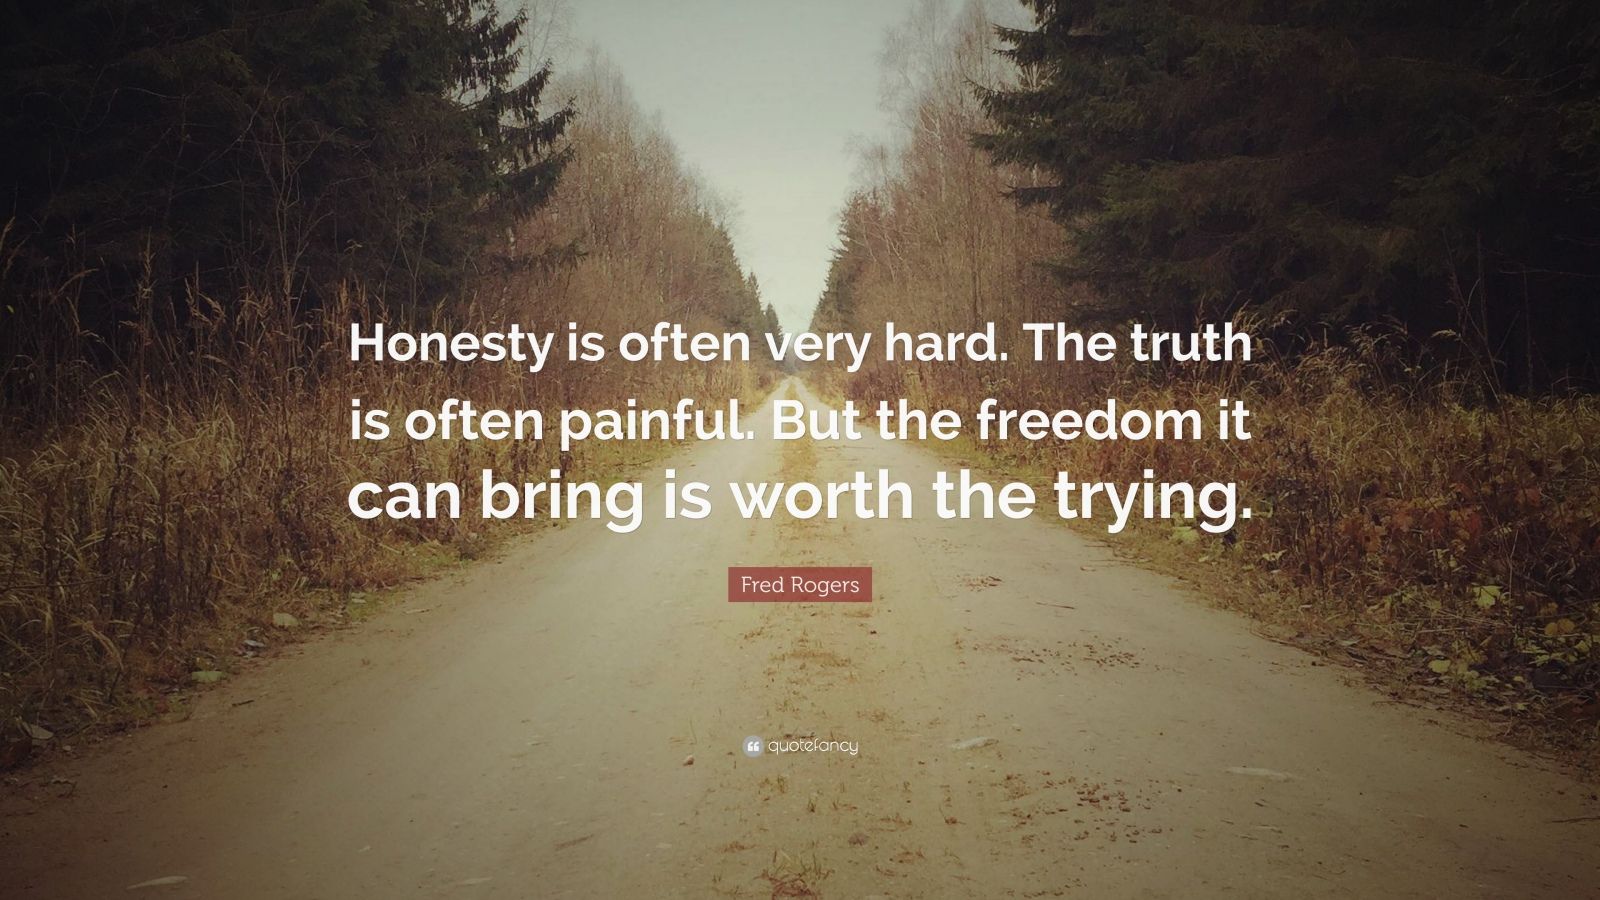 Fred Rogers Quote: “Honesty is often very hard. The truth is often